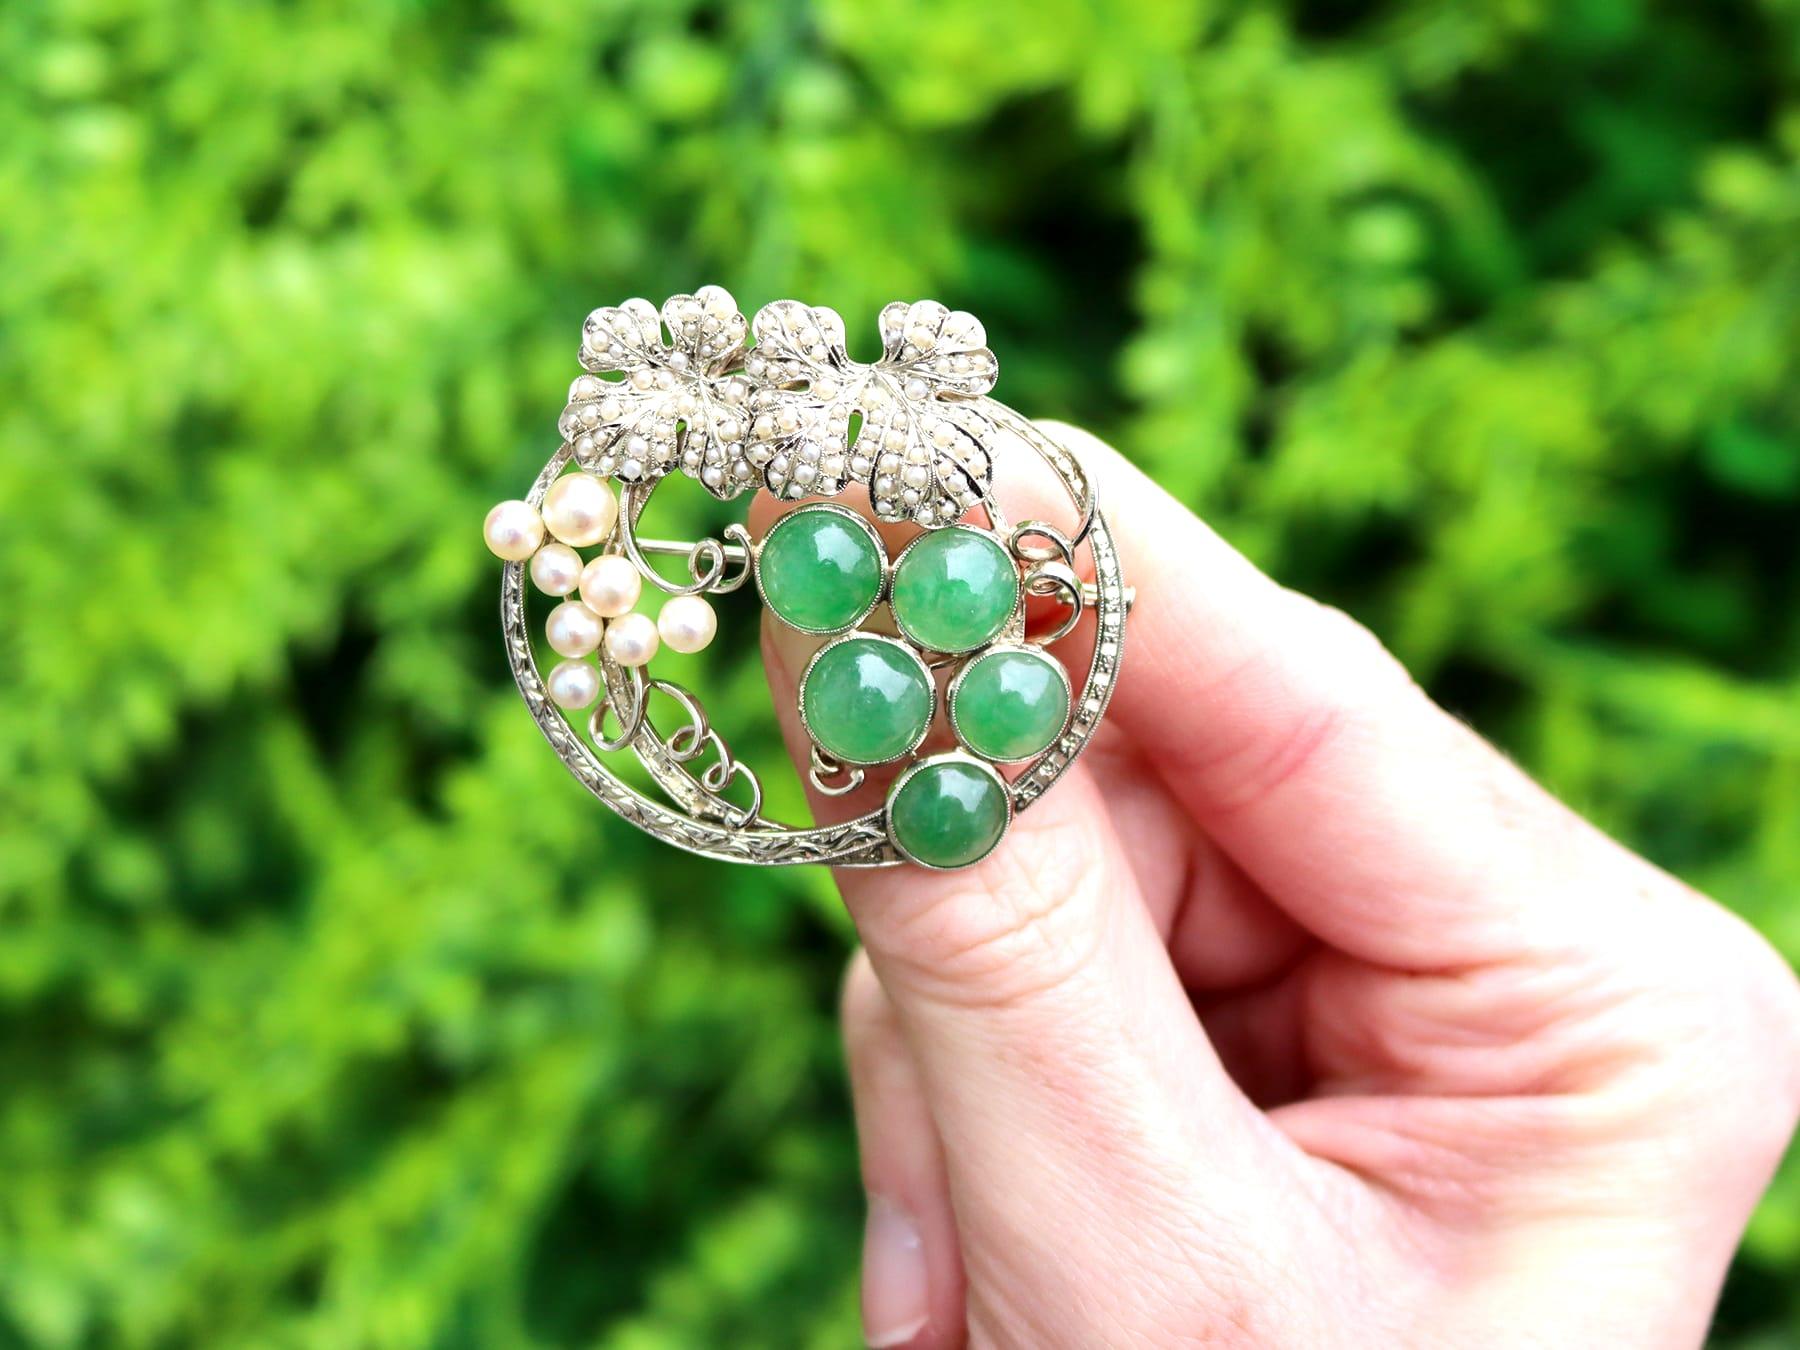 An exceptional, fine and impressive vintage seed pearl and 8.85 carat chrysoprase, 18 karat white gold brooch/pendant; part of our diverse vintage brooches collection.

This stunning, fine and impressive vintage brooch has been crafted in 18k white